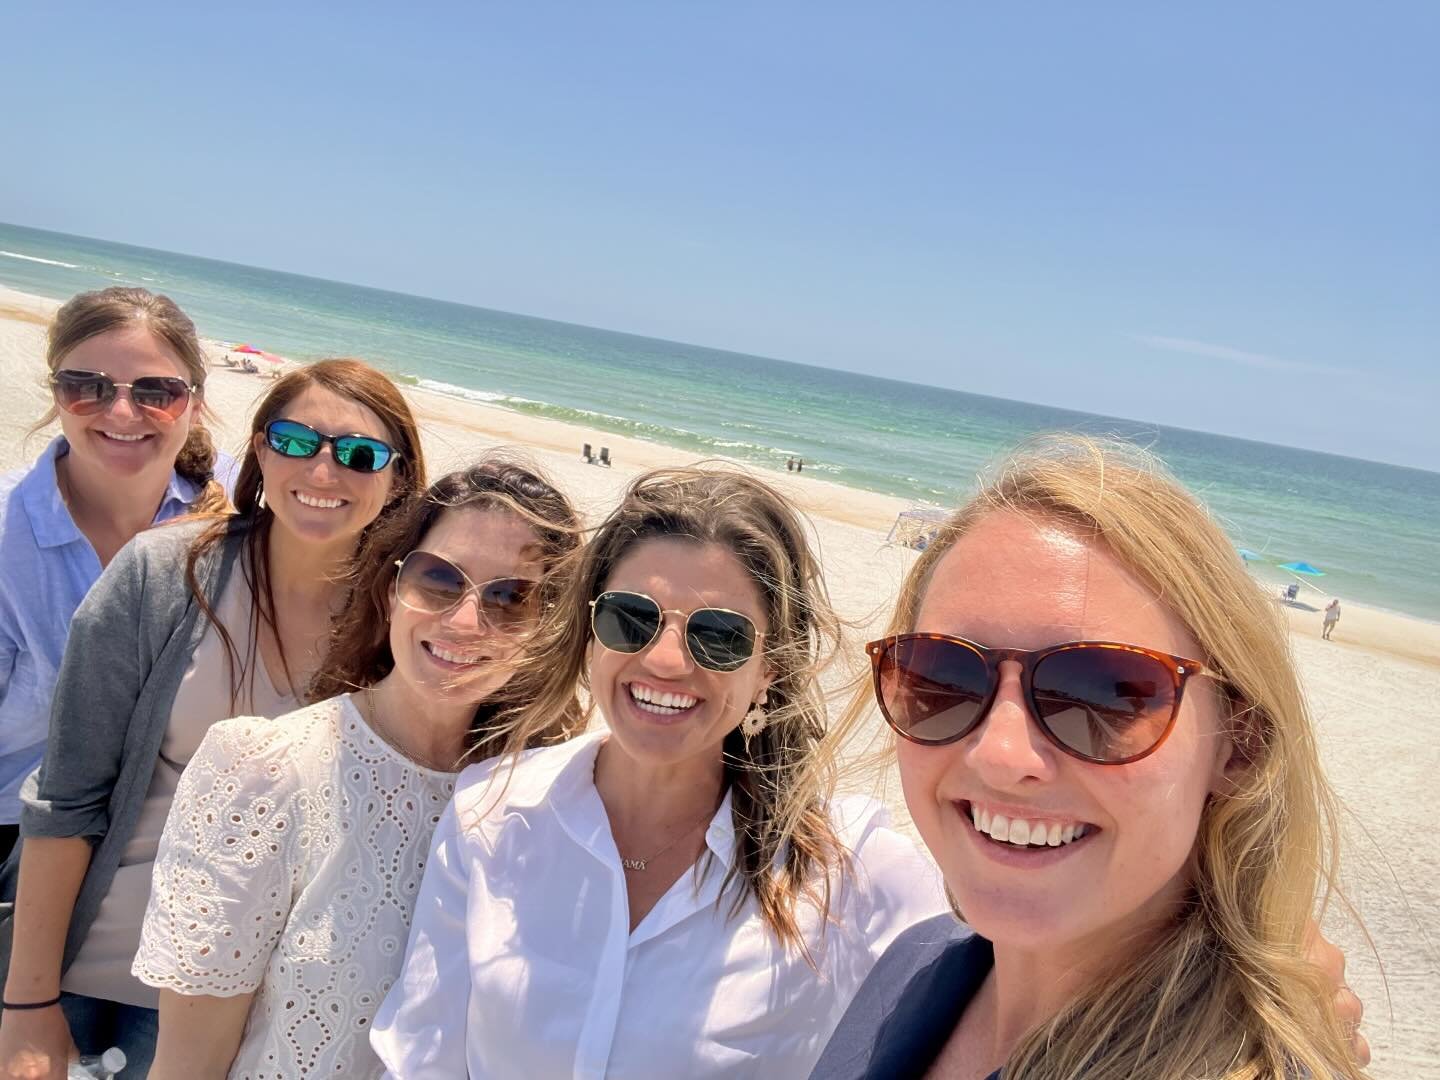 Greetings from @gulfcountyfl! 

🏝️We spent a few days exploring this unspoiled area of northwest Florida, home to pristine beaches, tranquil lakes, and the prettiest sunsets we&rsquo;ve ever seen. 

Stay tuned for more discoveries from this hidden g